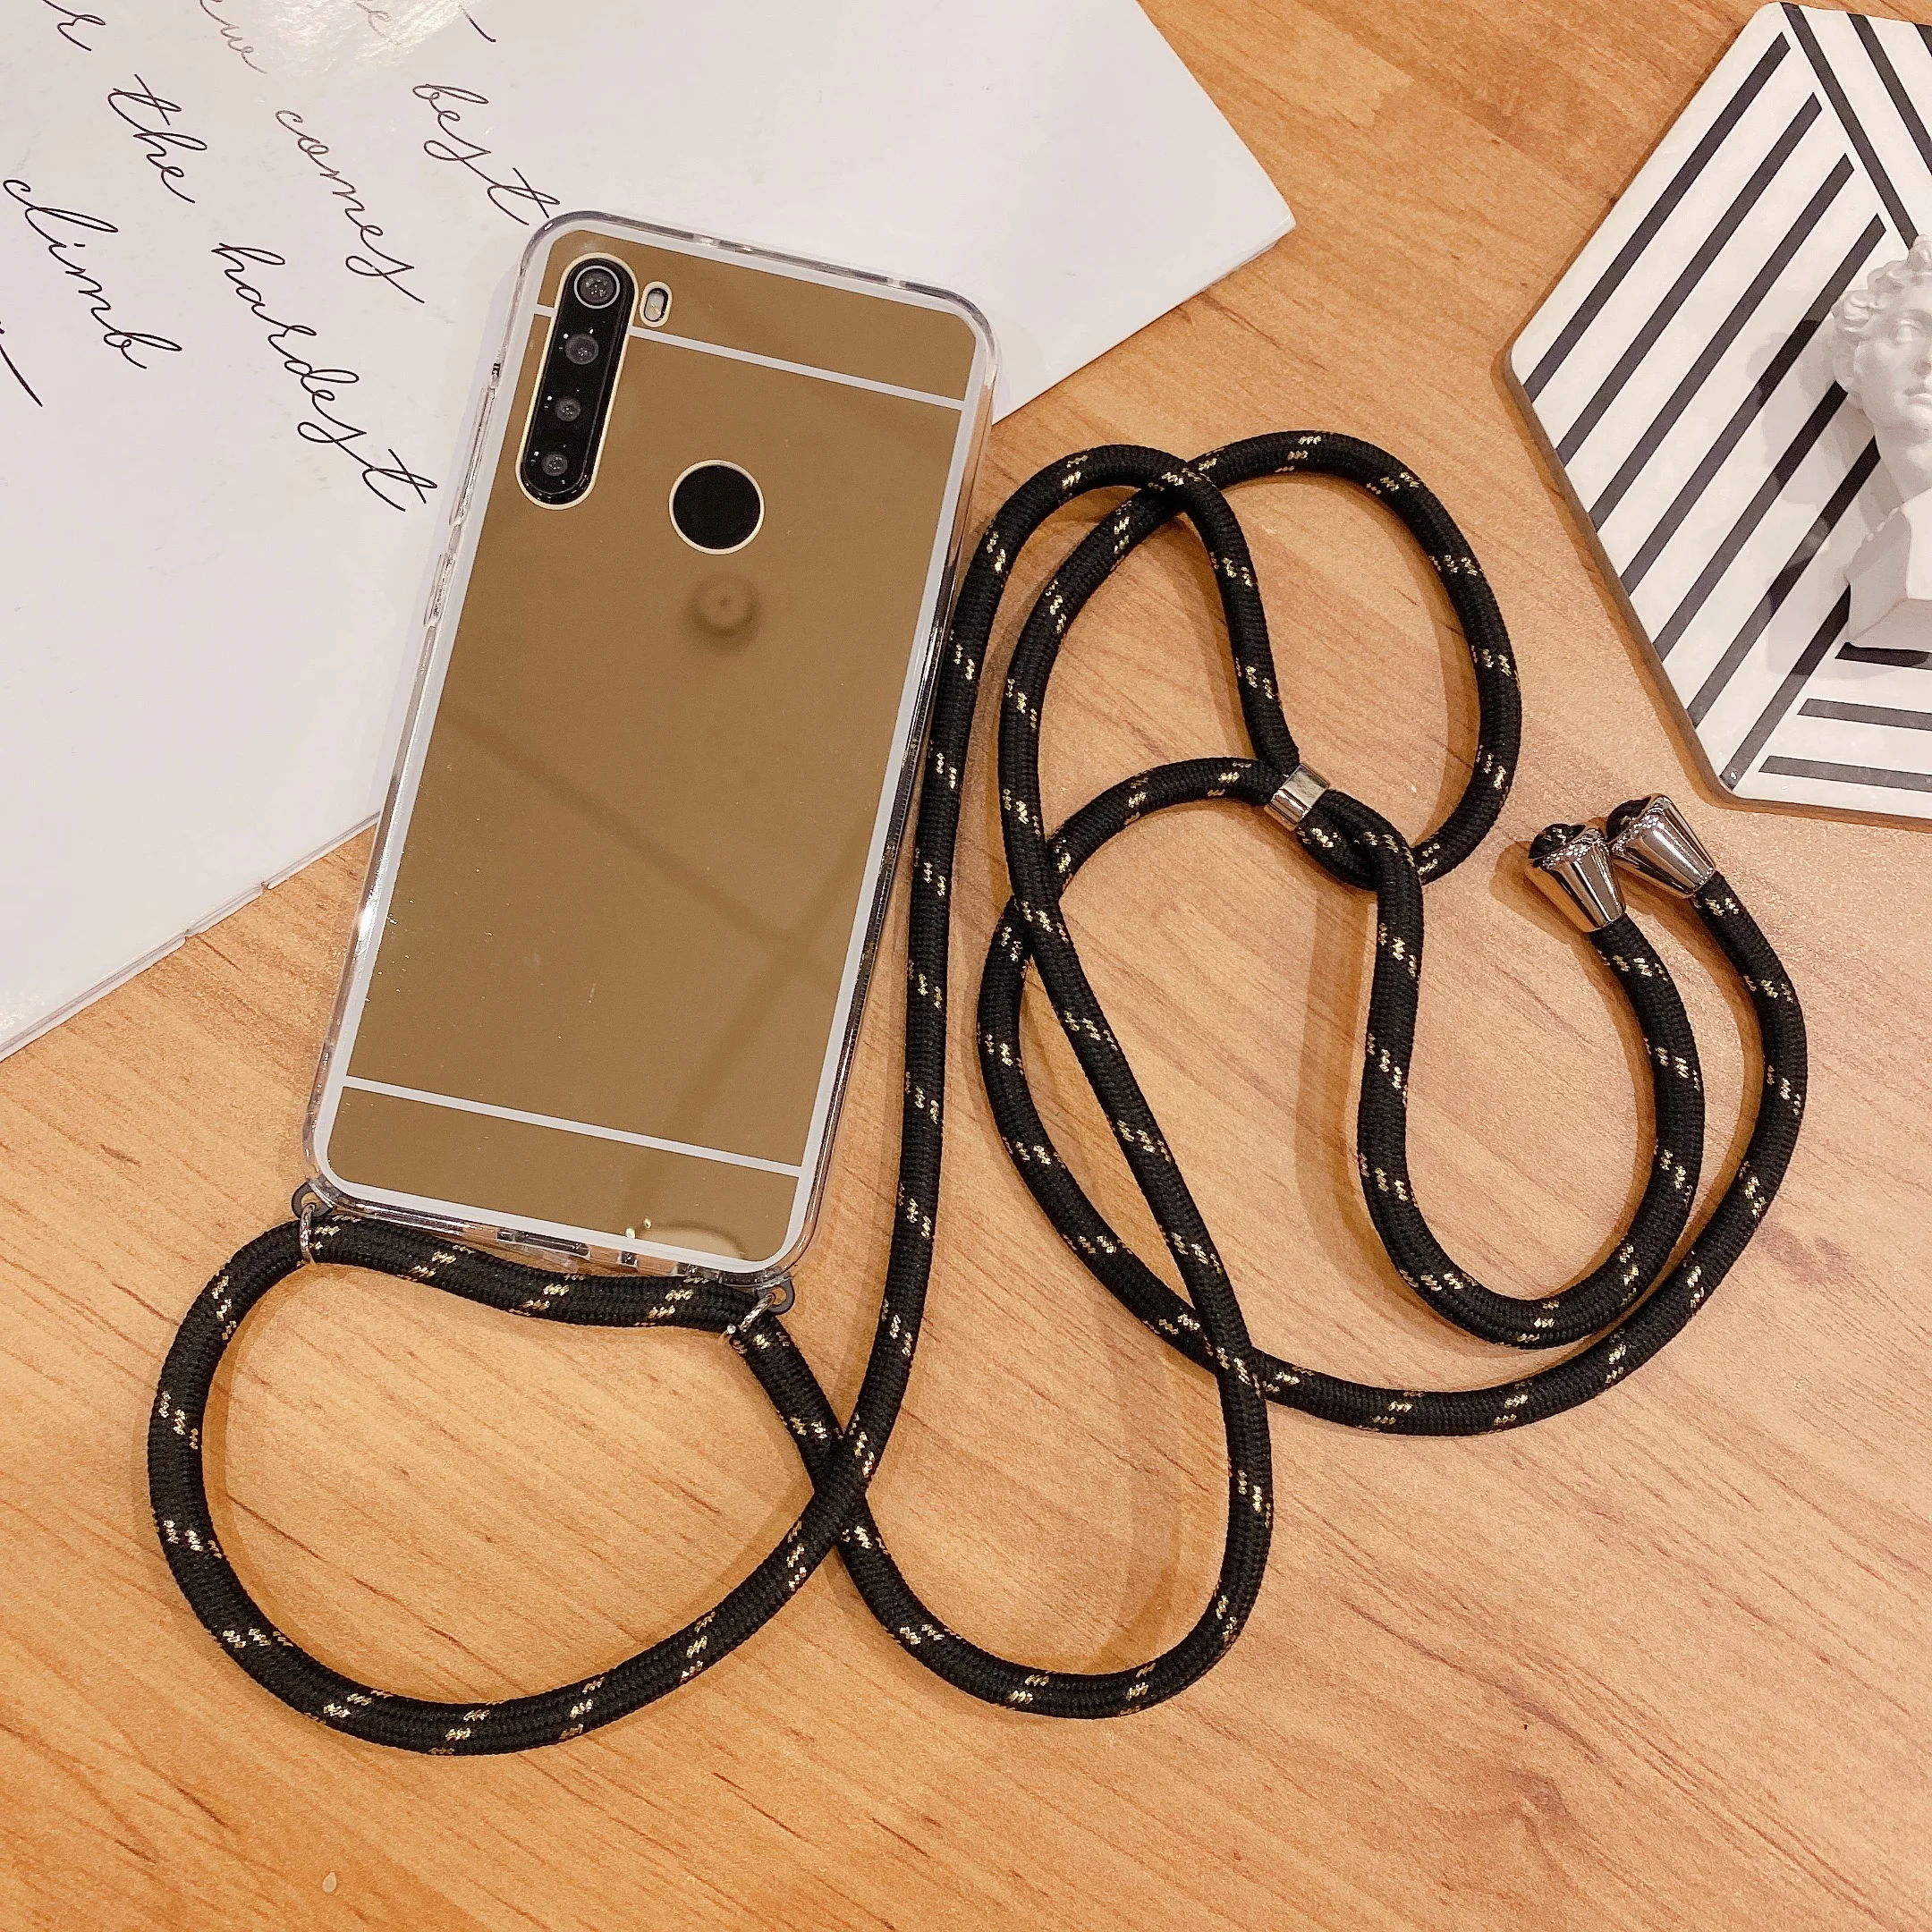 xiaomi leather case cosmos blue Plating Makeup Mirror Case for Xiaomi Redmi 4 5 6 7 8 9 6A 7A 8A S2 K20 K30 Pro Necklace Cord Chain Hanging Rope Crossbody Cover xiaomi leather case case